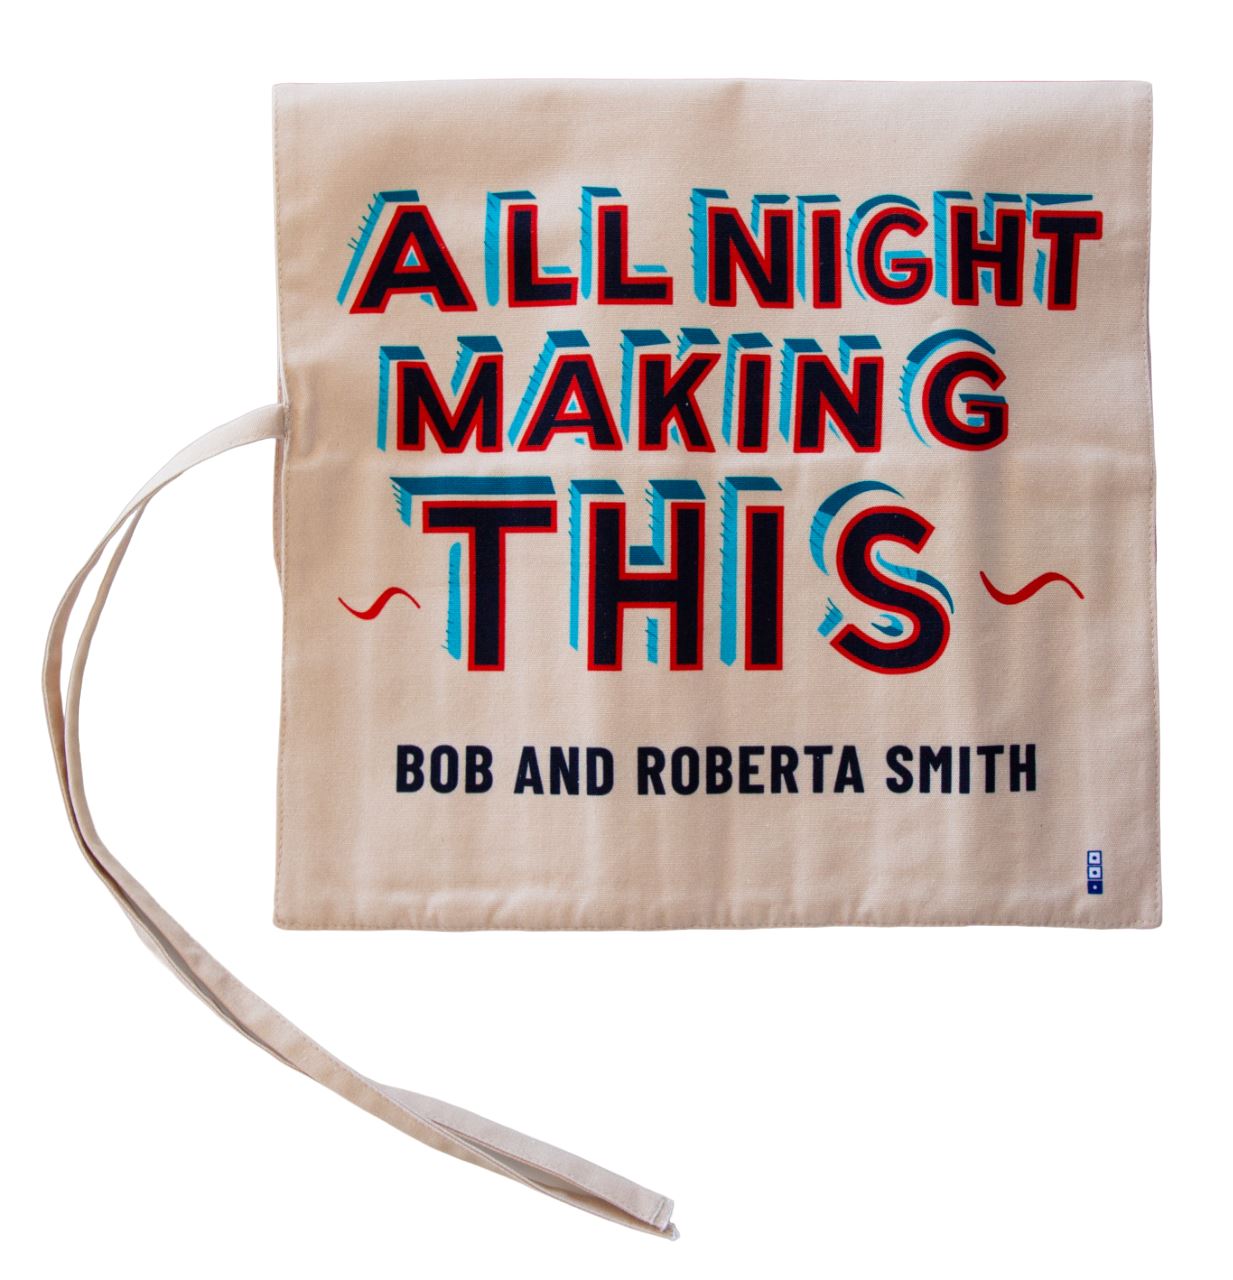 I Was Up All Night Making This Brush Roll x Bob and Roberta Smith - Third Drawer Down